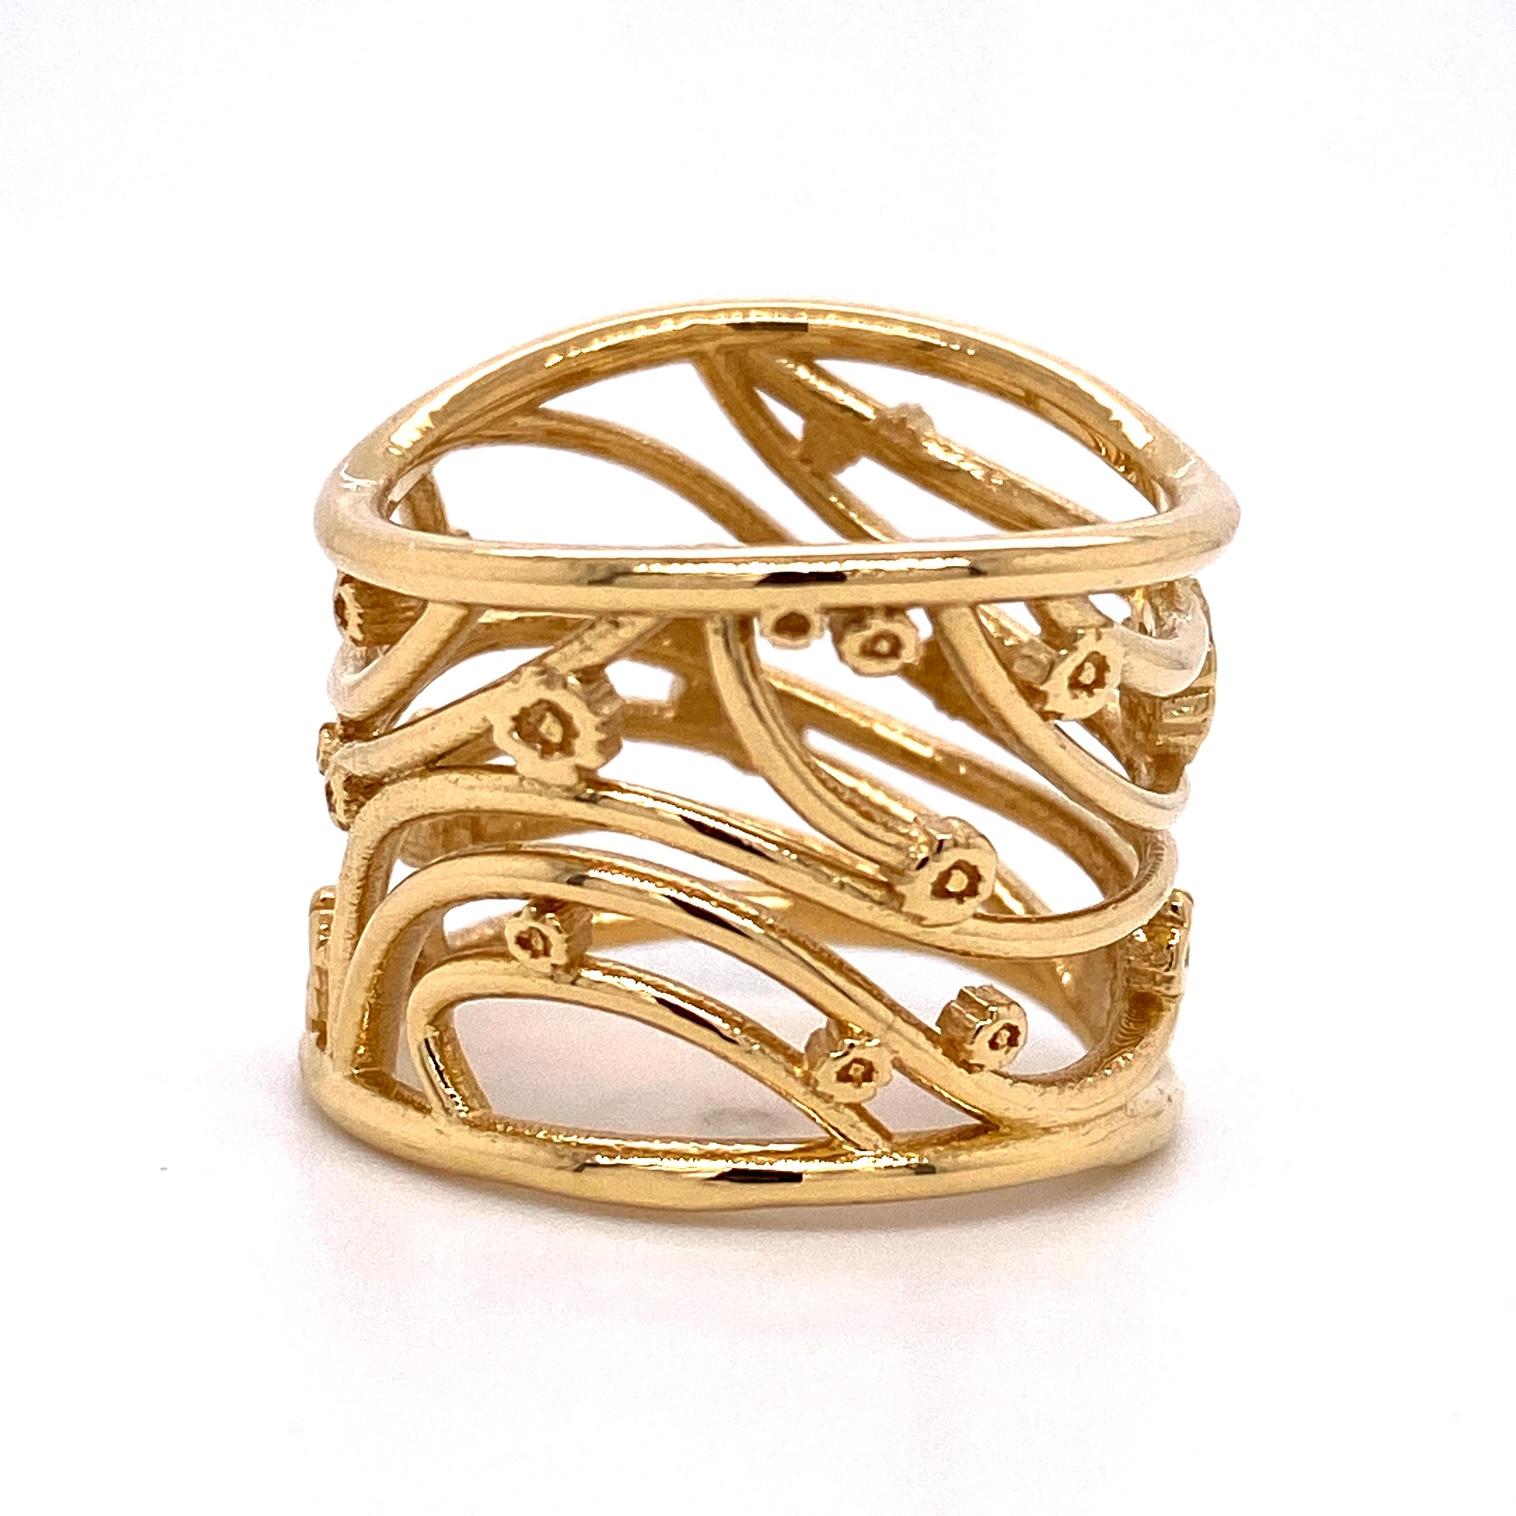 An 18k yellow gold wide ring inspired by the artwork of Gustav Klimt. Ring size 7. This ring was made and designed by llyn strong.